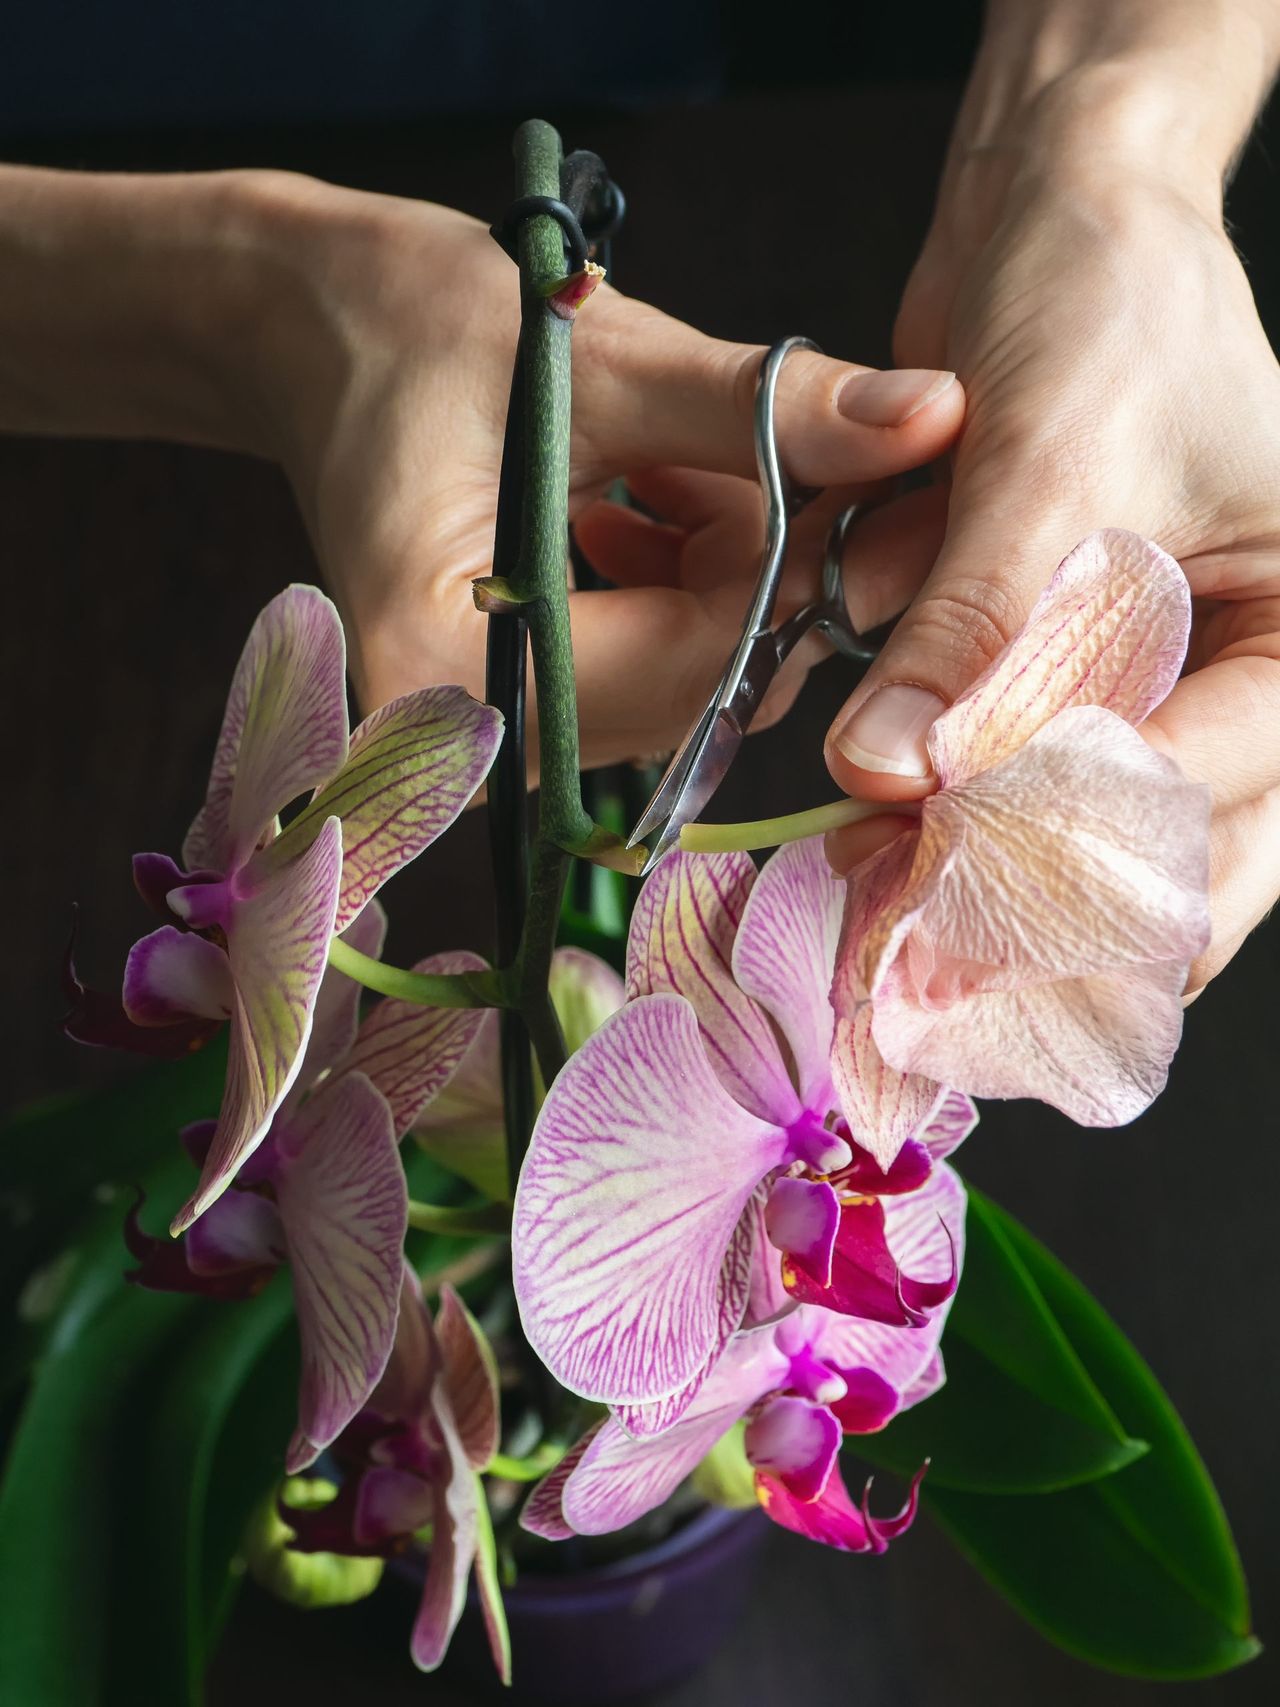 Pruning damaged orchid flowers with scissors. Home gardening, orchid breeding. Dry deep purple flower. Insects, pests of indoor plants, death of orchids. Vertical view.